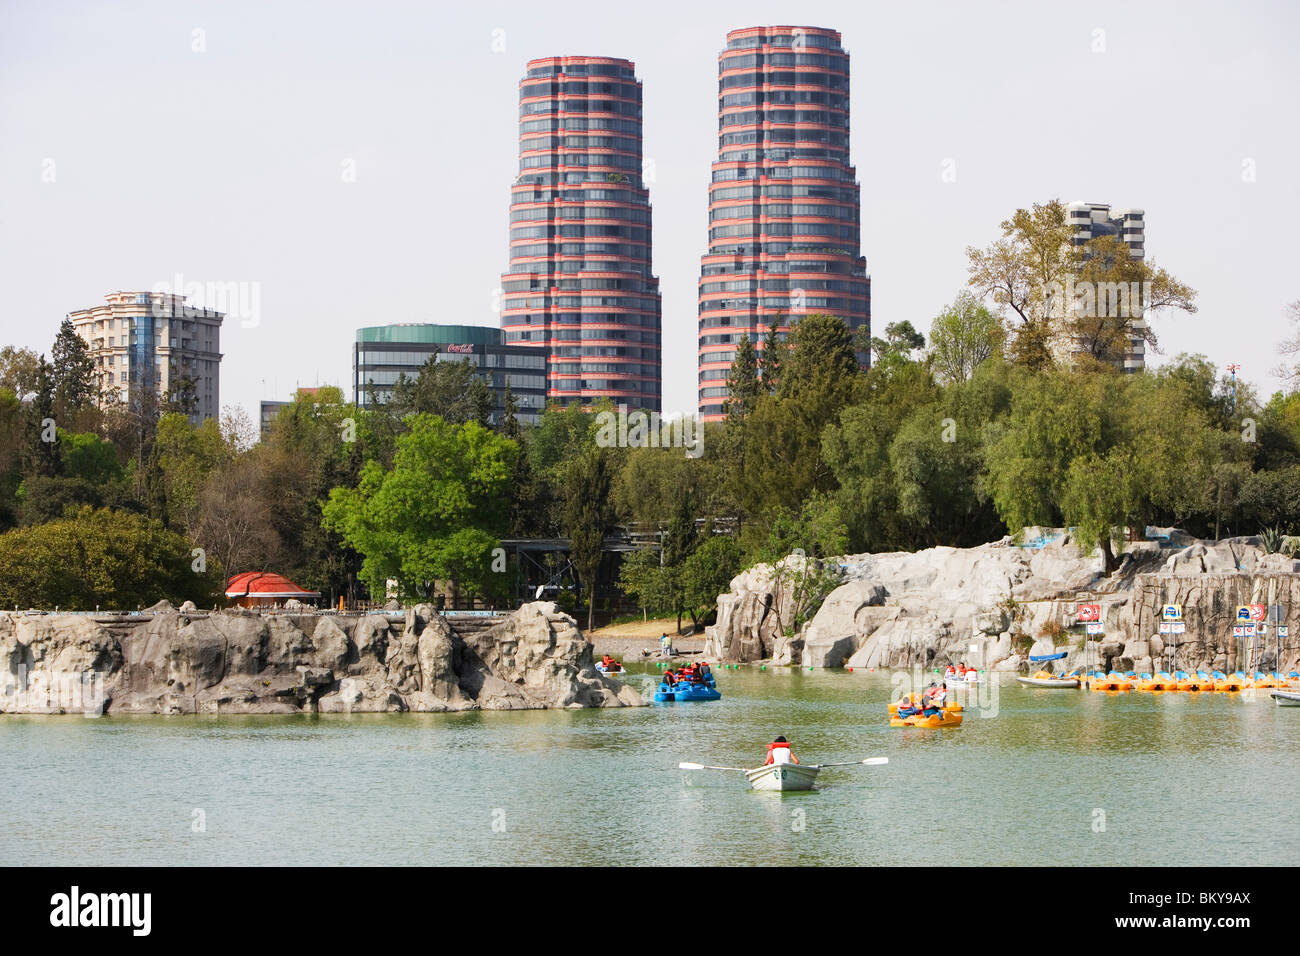 Chapultepec lake in Chapultepec park, with the Residencial del Bosque towers one and two by Cesar Pelli in the background, Mexic Stock Photo